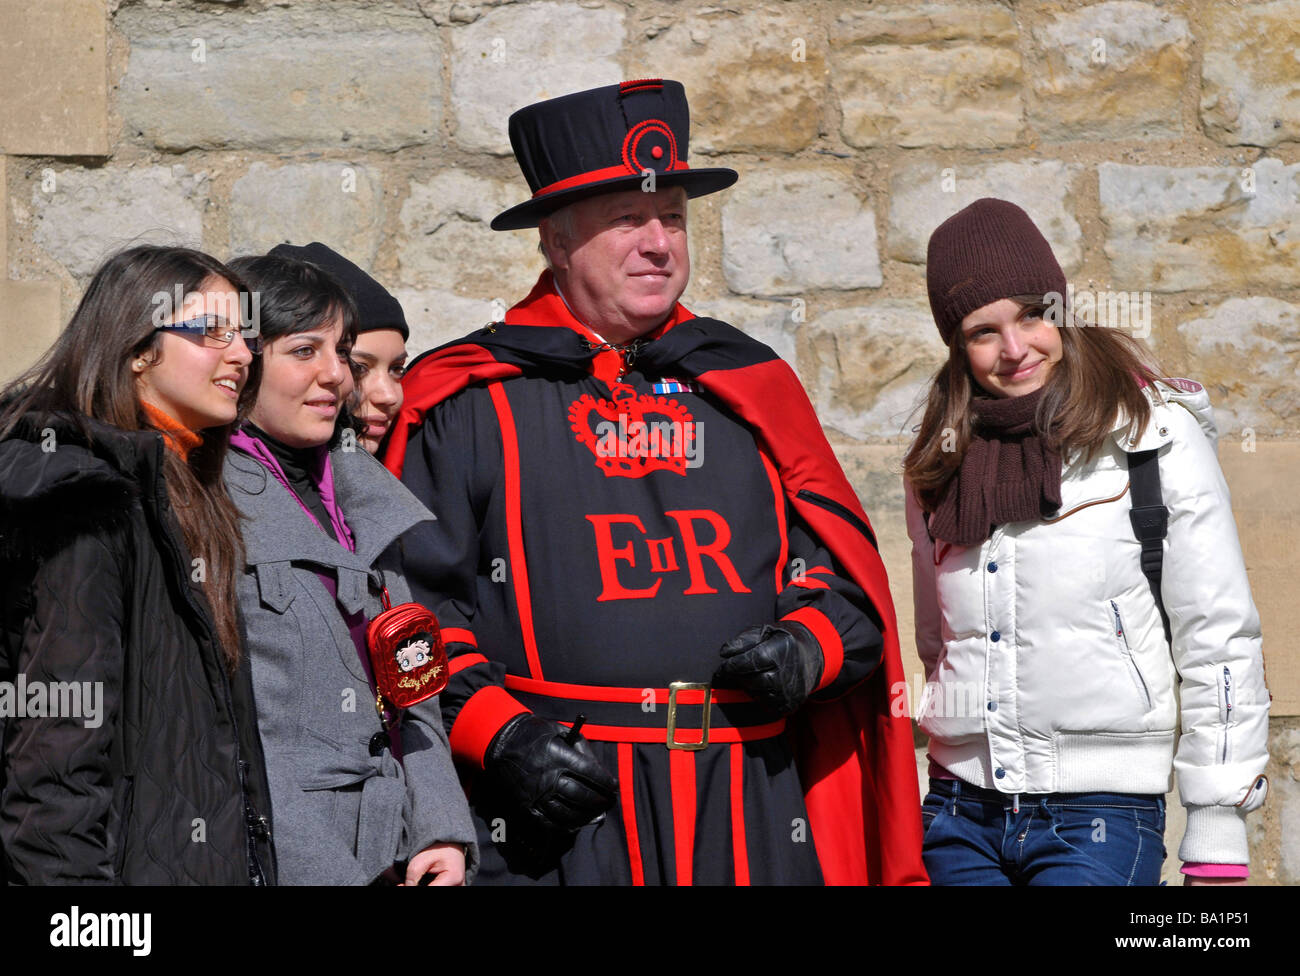 Beefeater oder Yeoman, Tower of London, England, UK Stockfoto